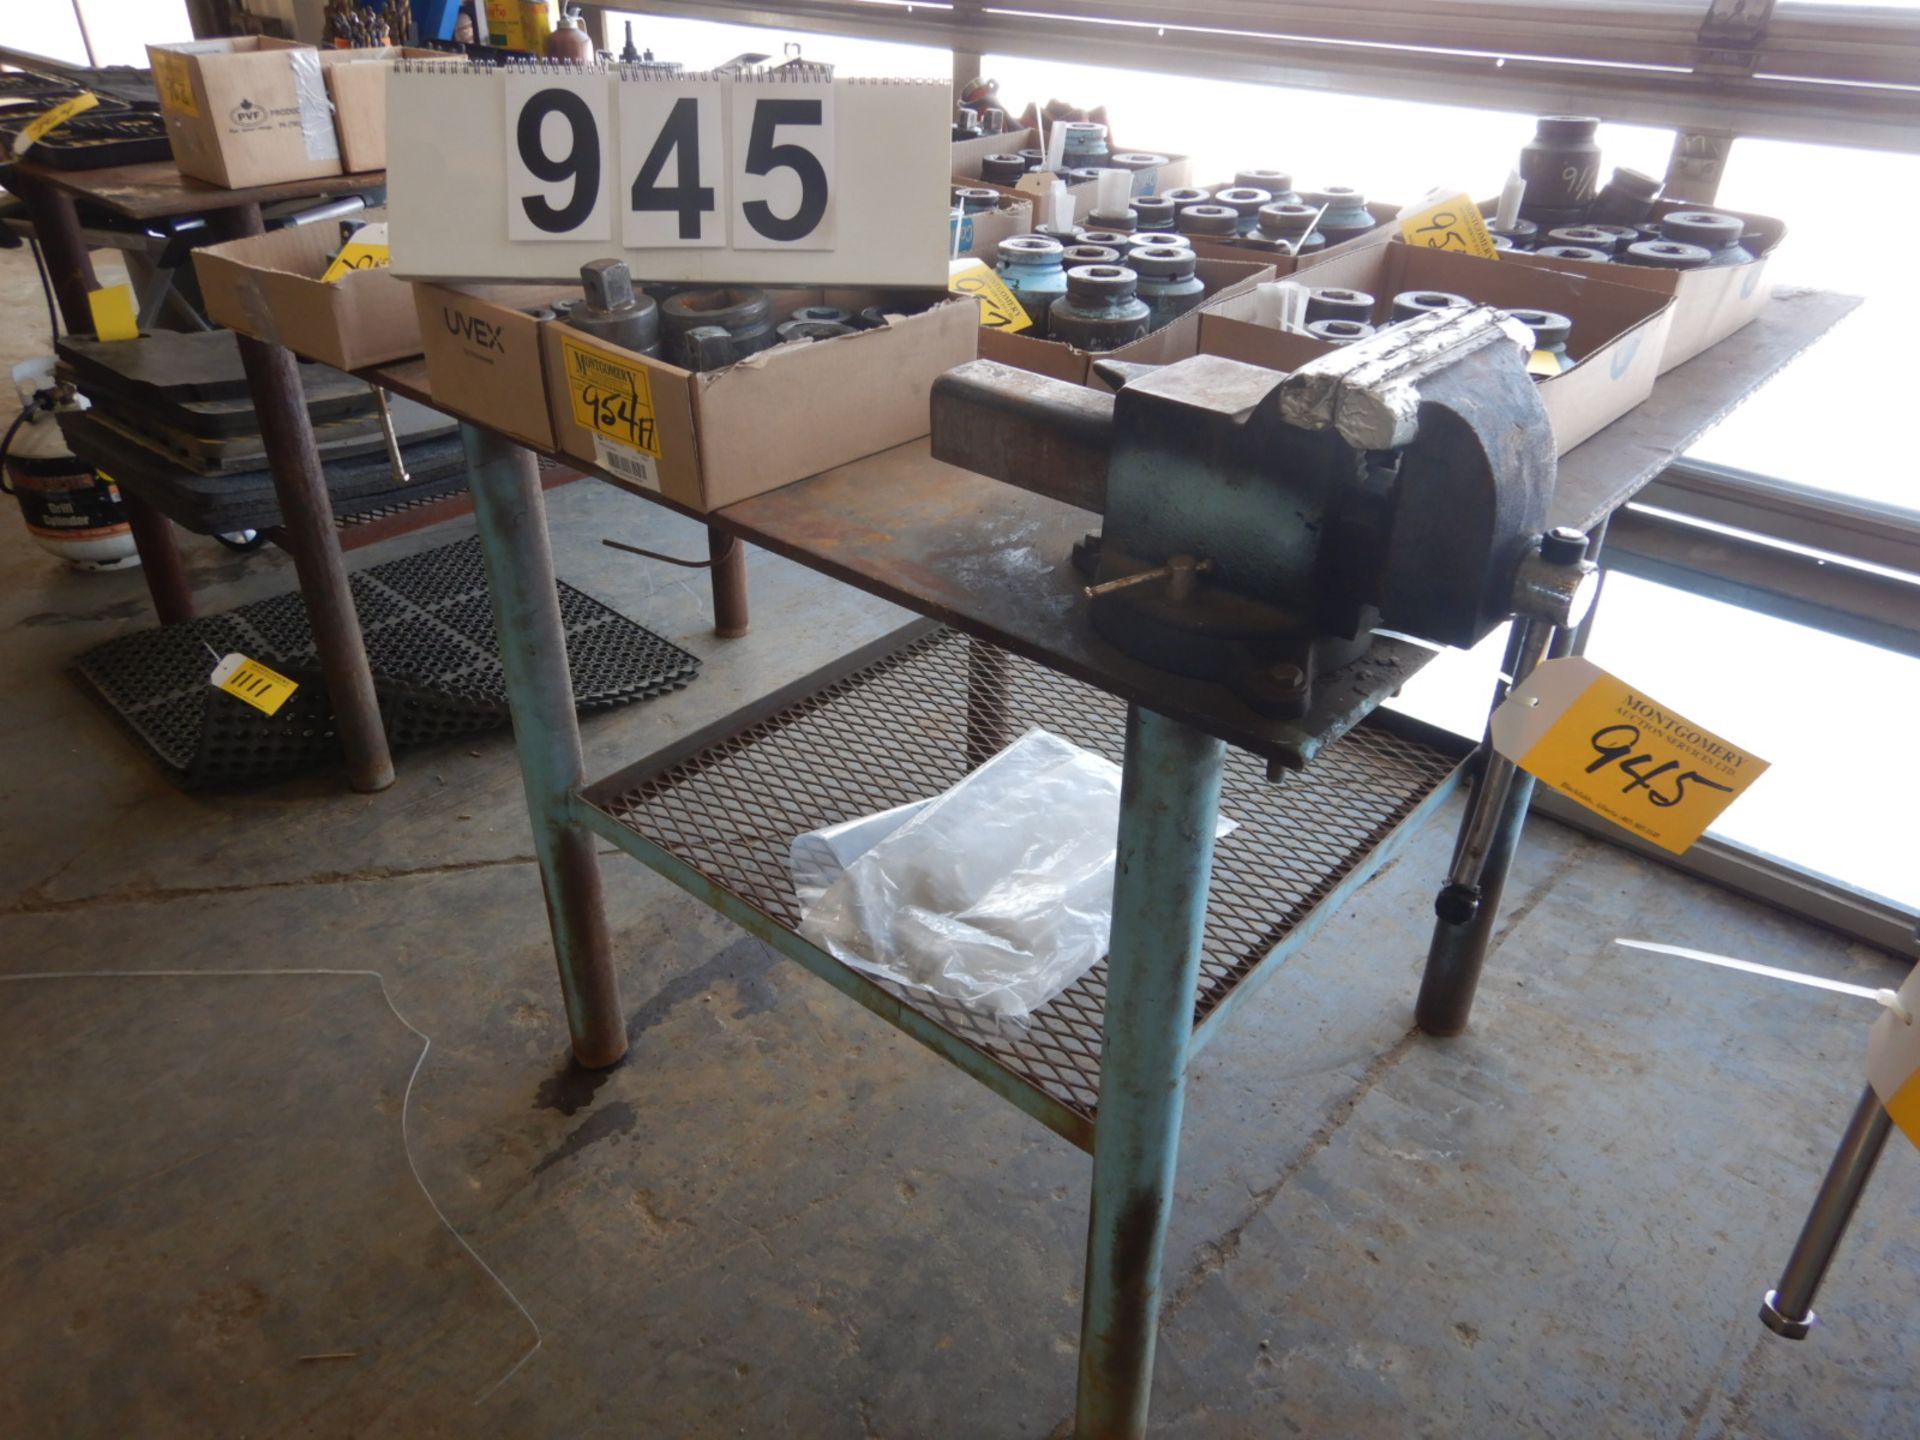 46"X48" STEEL WELDING TABLE W/6" BENCH VISE, RIDGID BC610A PIPE VISE